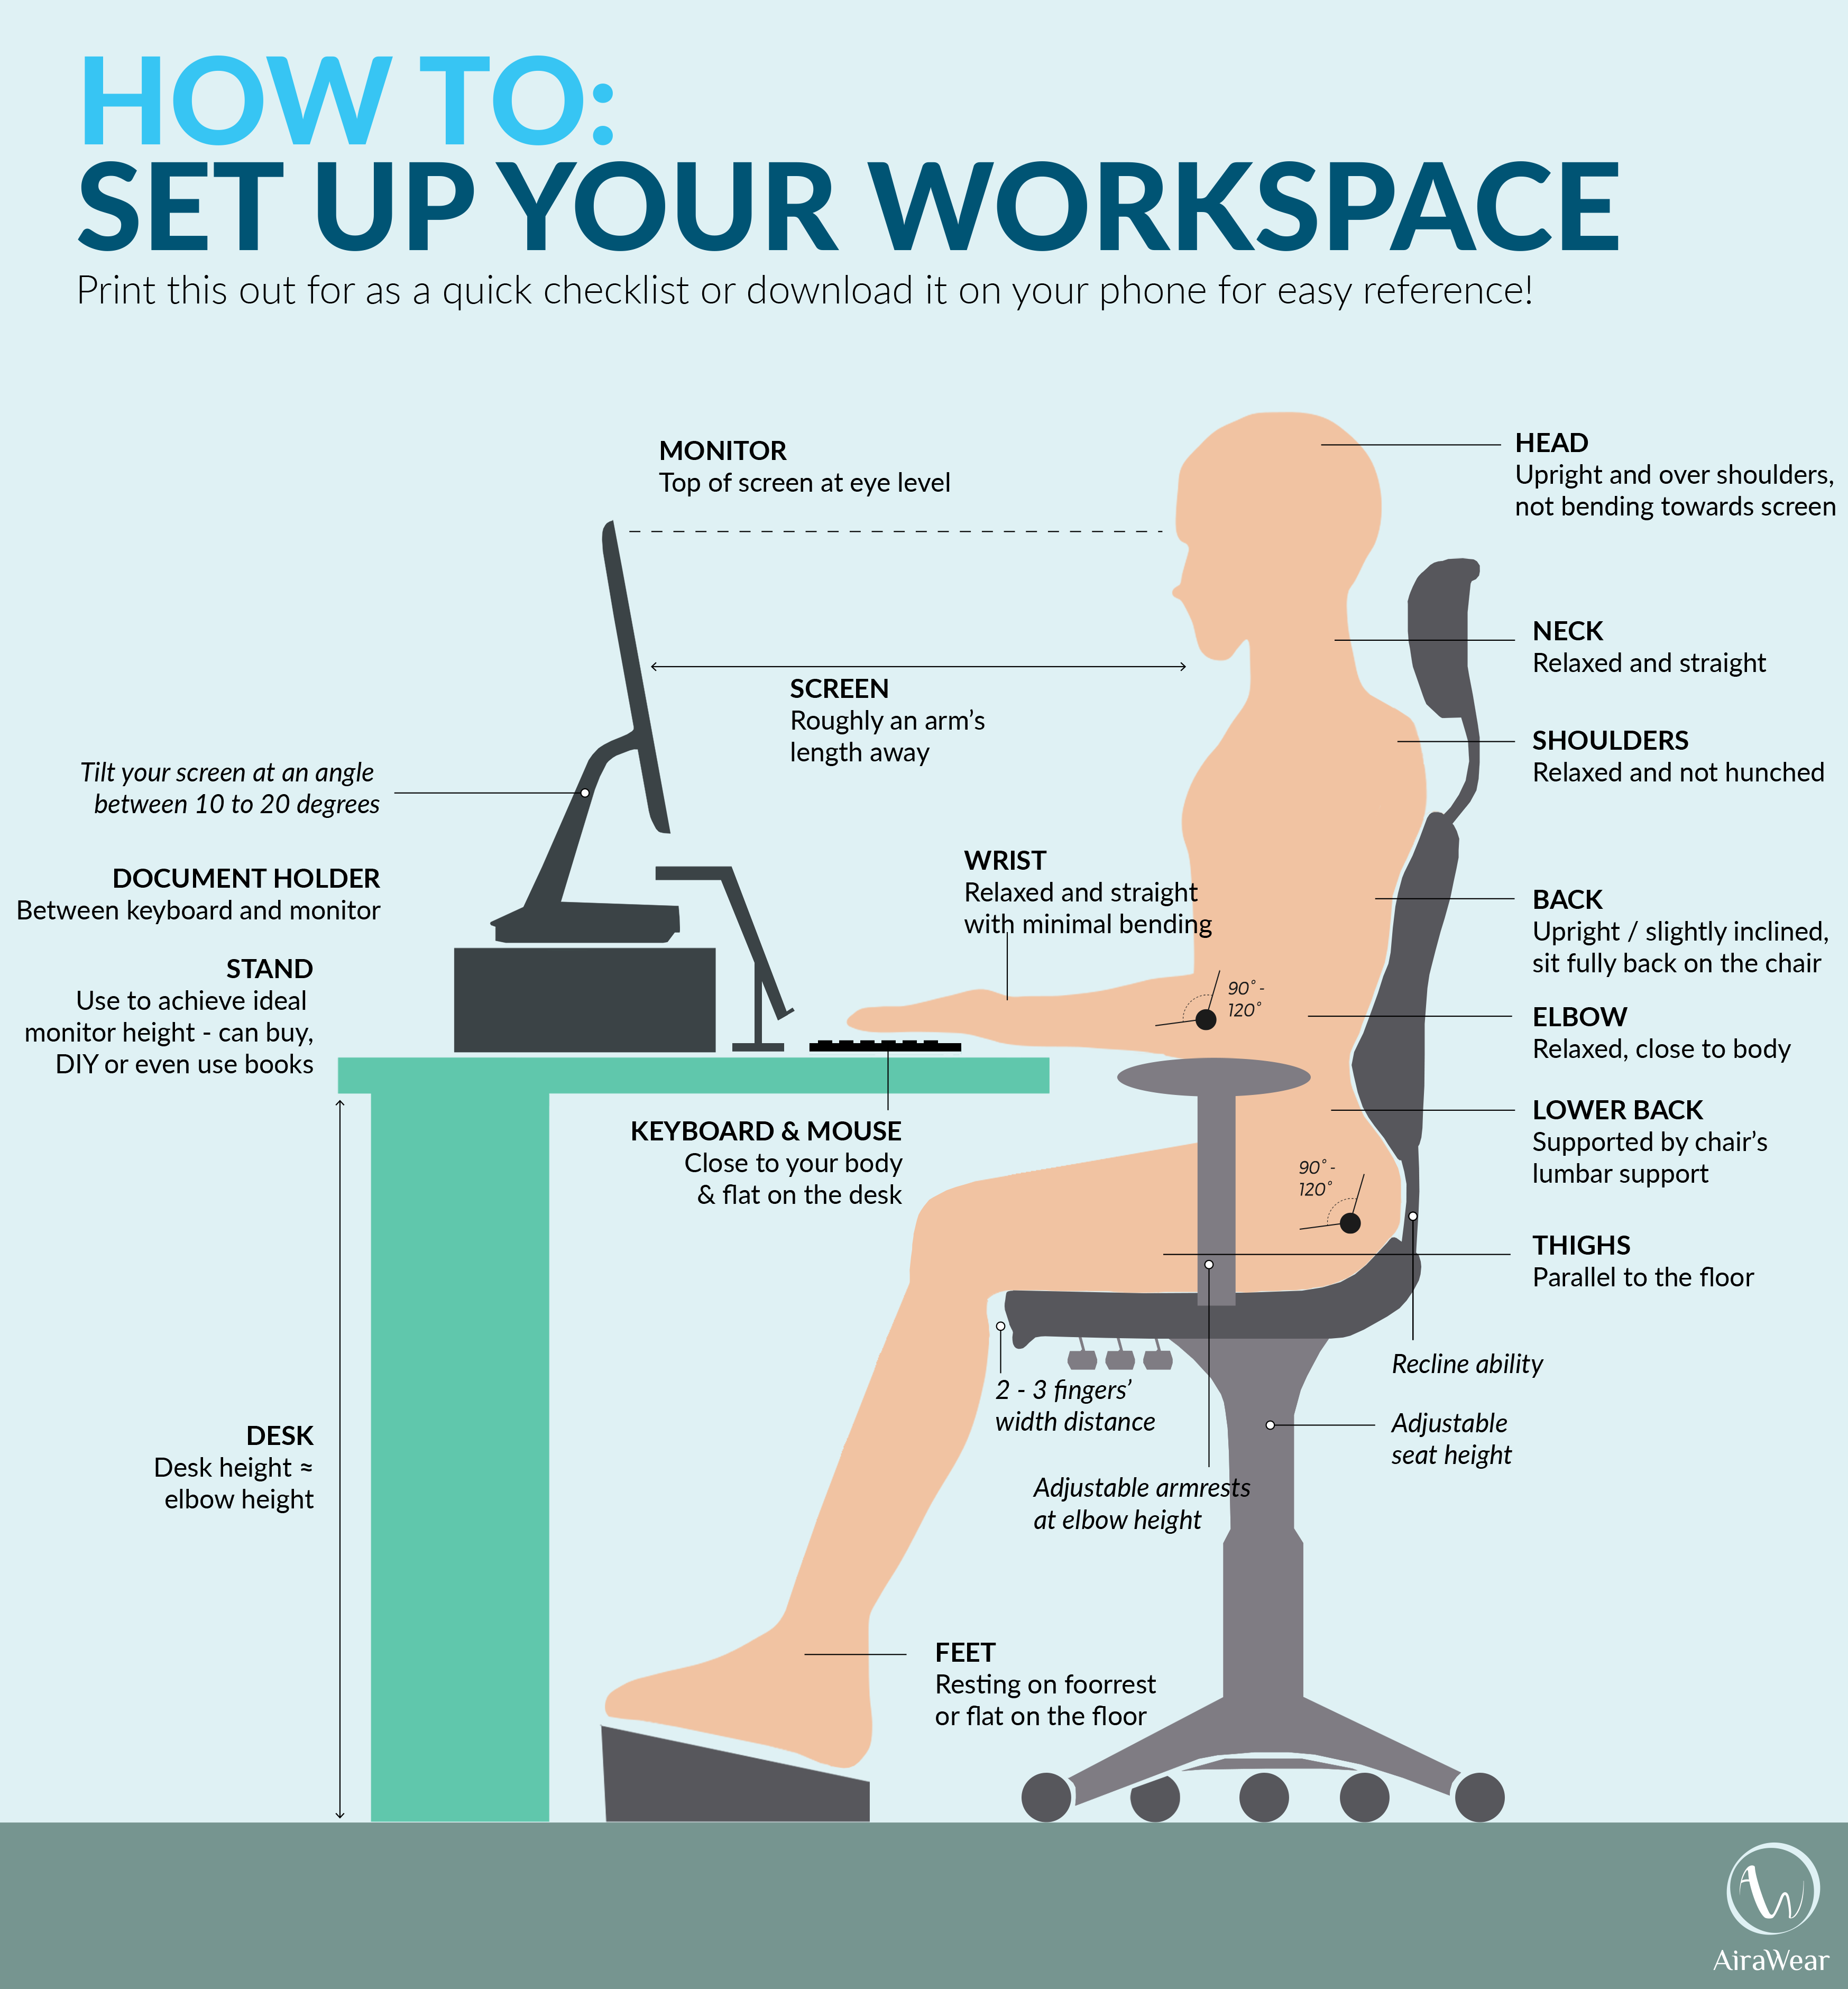 How to have great posture at your desk